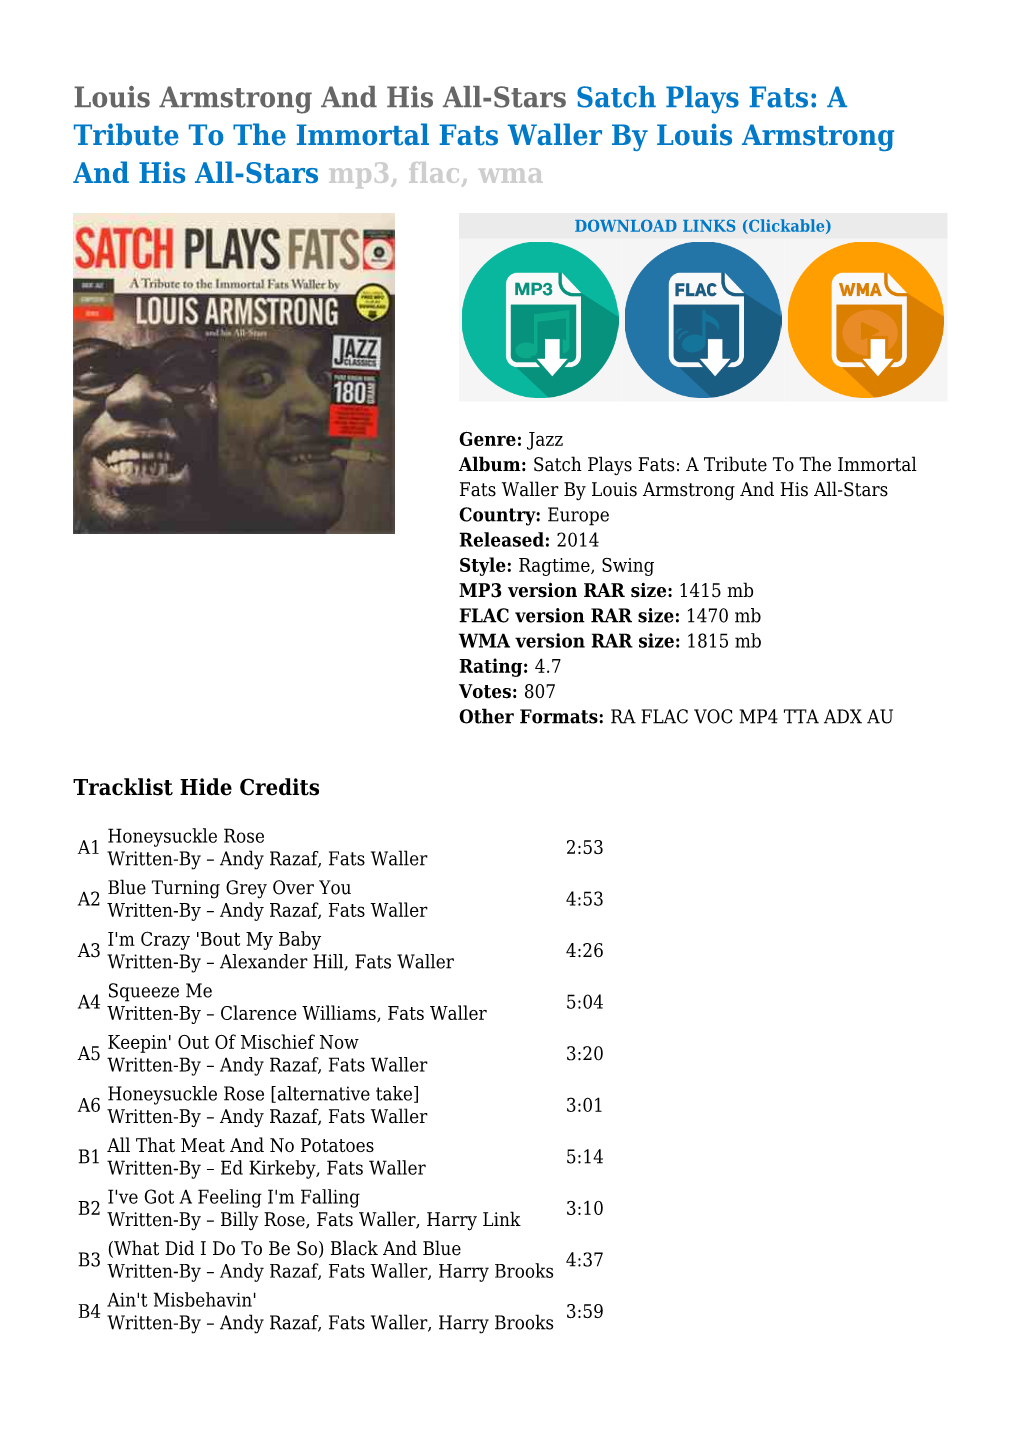 Louis Armstrong and His All-Stars Satch Plays Fats: a Tribute to the Immortal Fats Waller by Louis Armstrong and His All-Stars Mp3, Flac, Wma